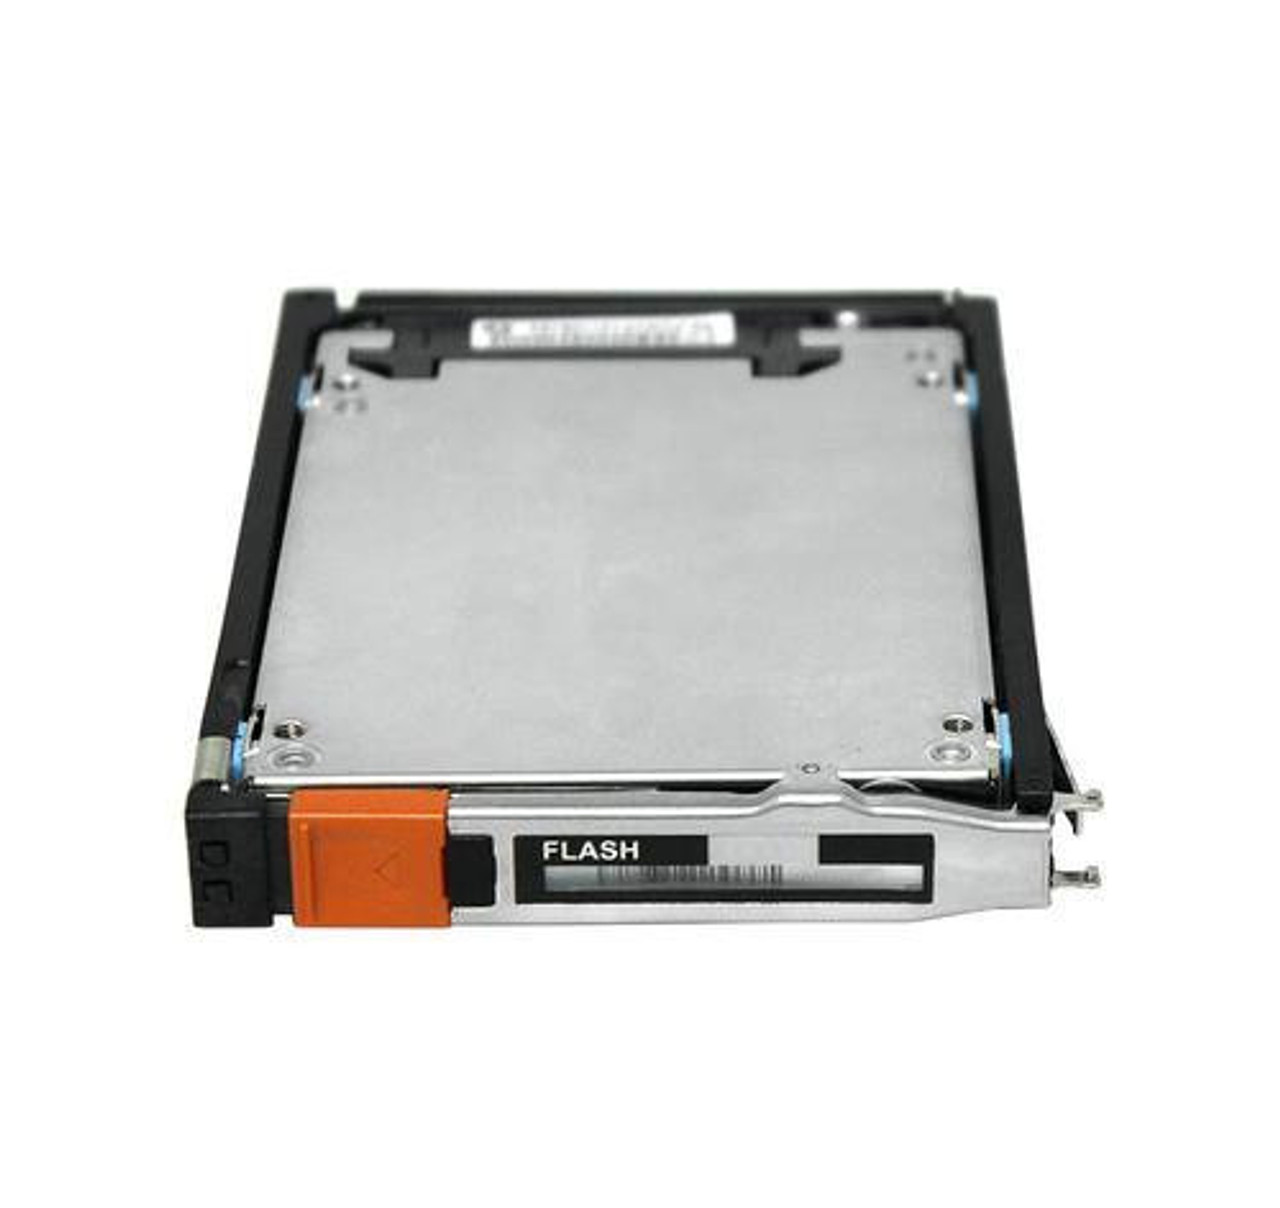 FLVX2S6F100N | EMC | 100GB Fast Cache Flash 2.5-inch Internal Solid State Drive (SSD) for VNX 25 x 2.5 DPE/DAE